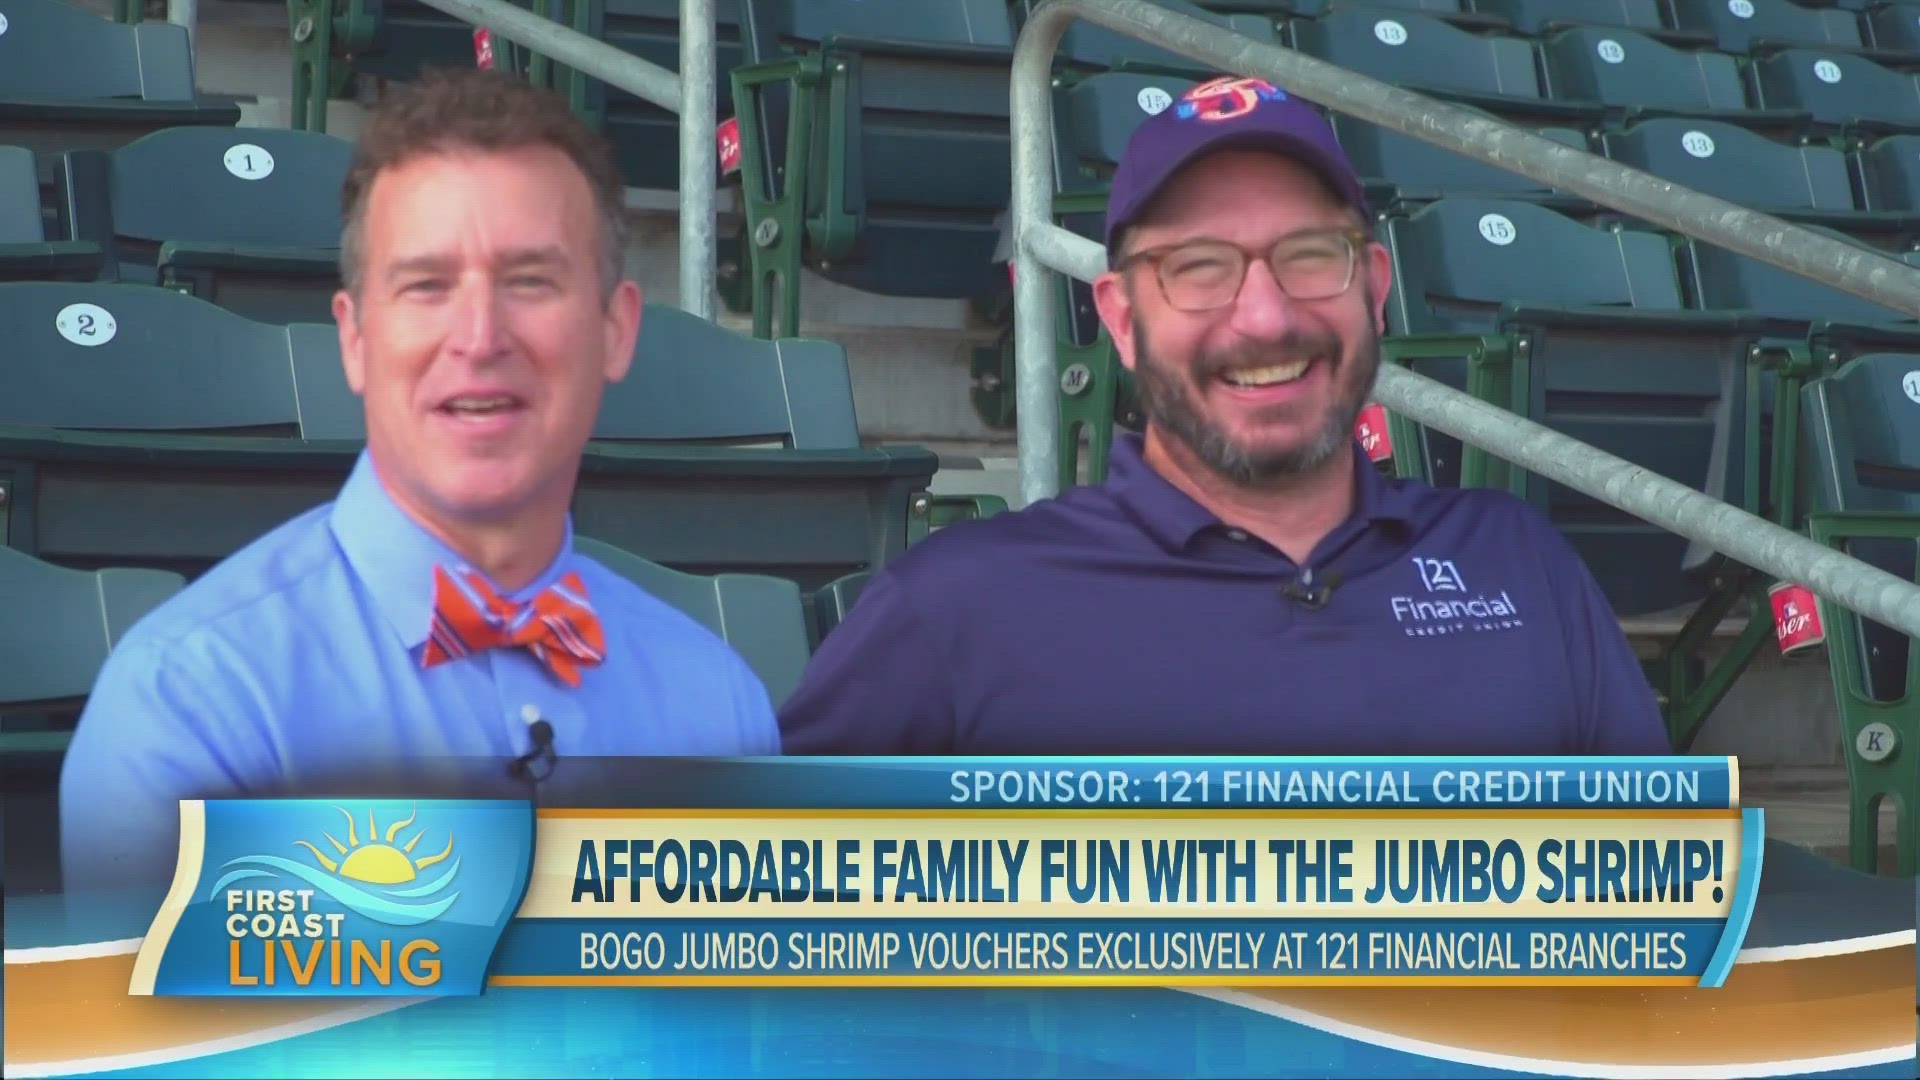 Adam Wade, Vice President of Marketing for 121 Financial, talks about their great Jumbo Shrimp ticket deal going on from March 13th-18th at all branches around town.